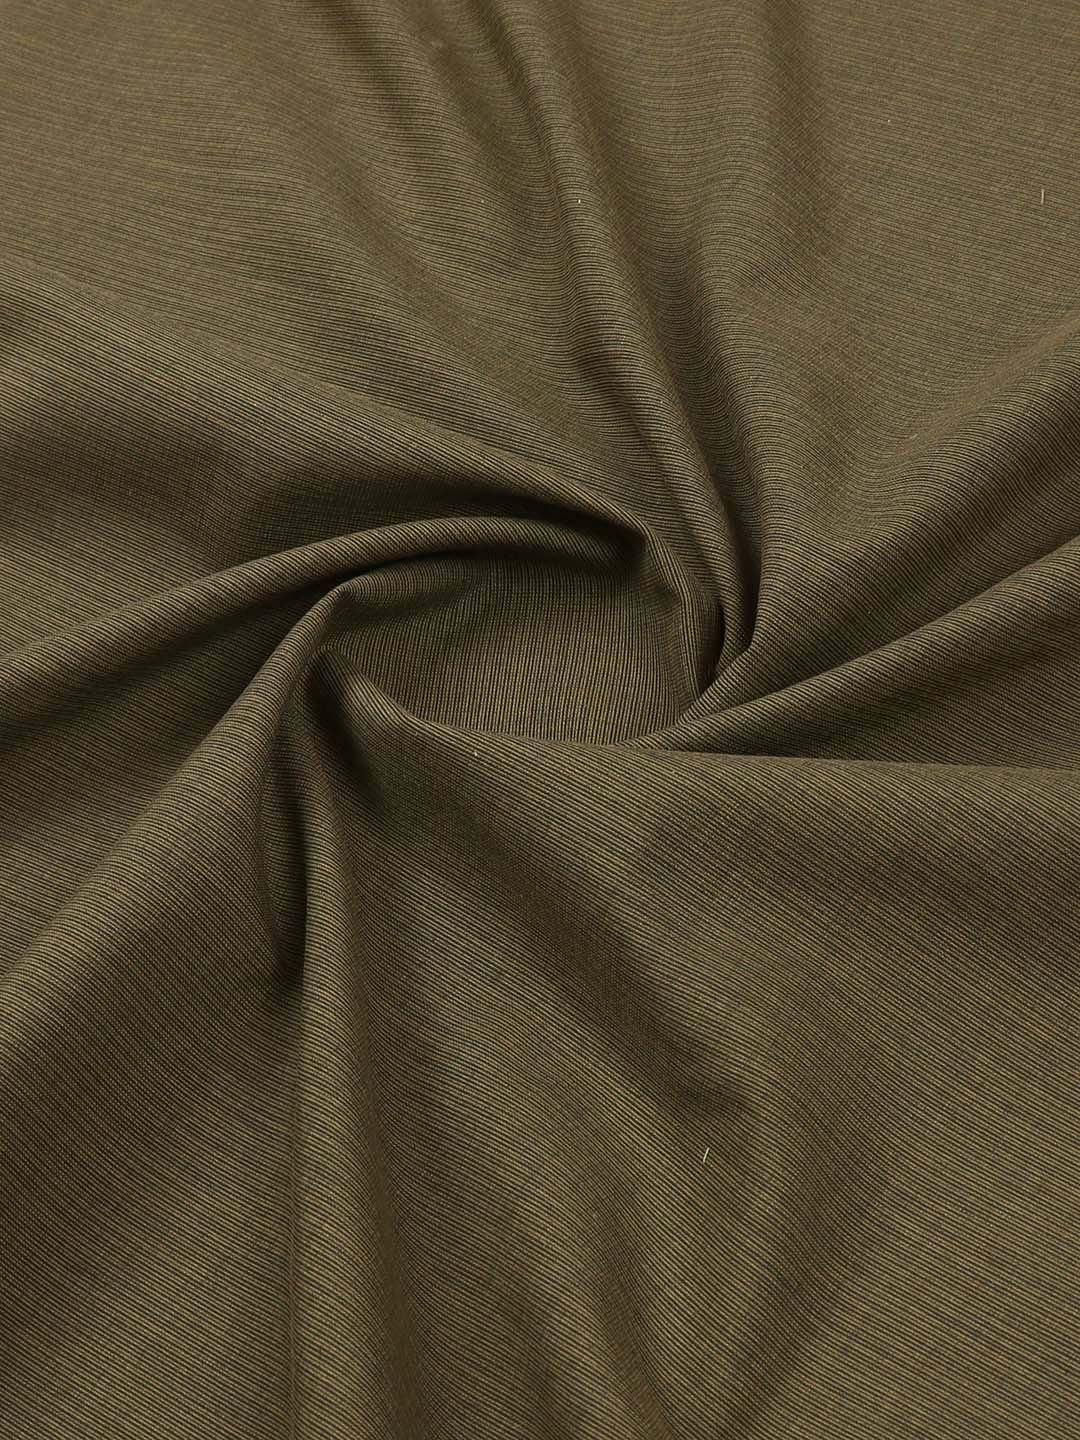 Cotton Colour Checked Pants Fabric Brown & Green All Days-Close view